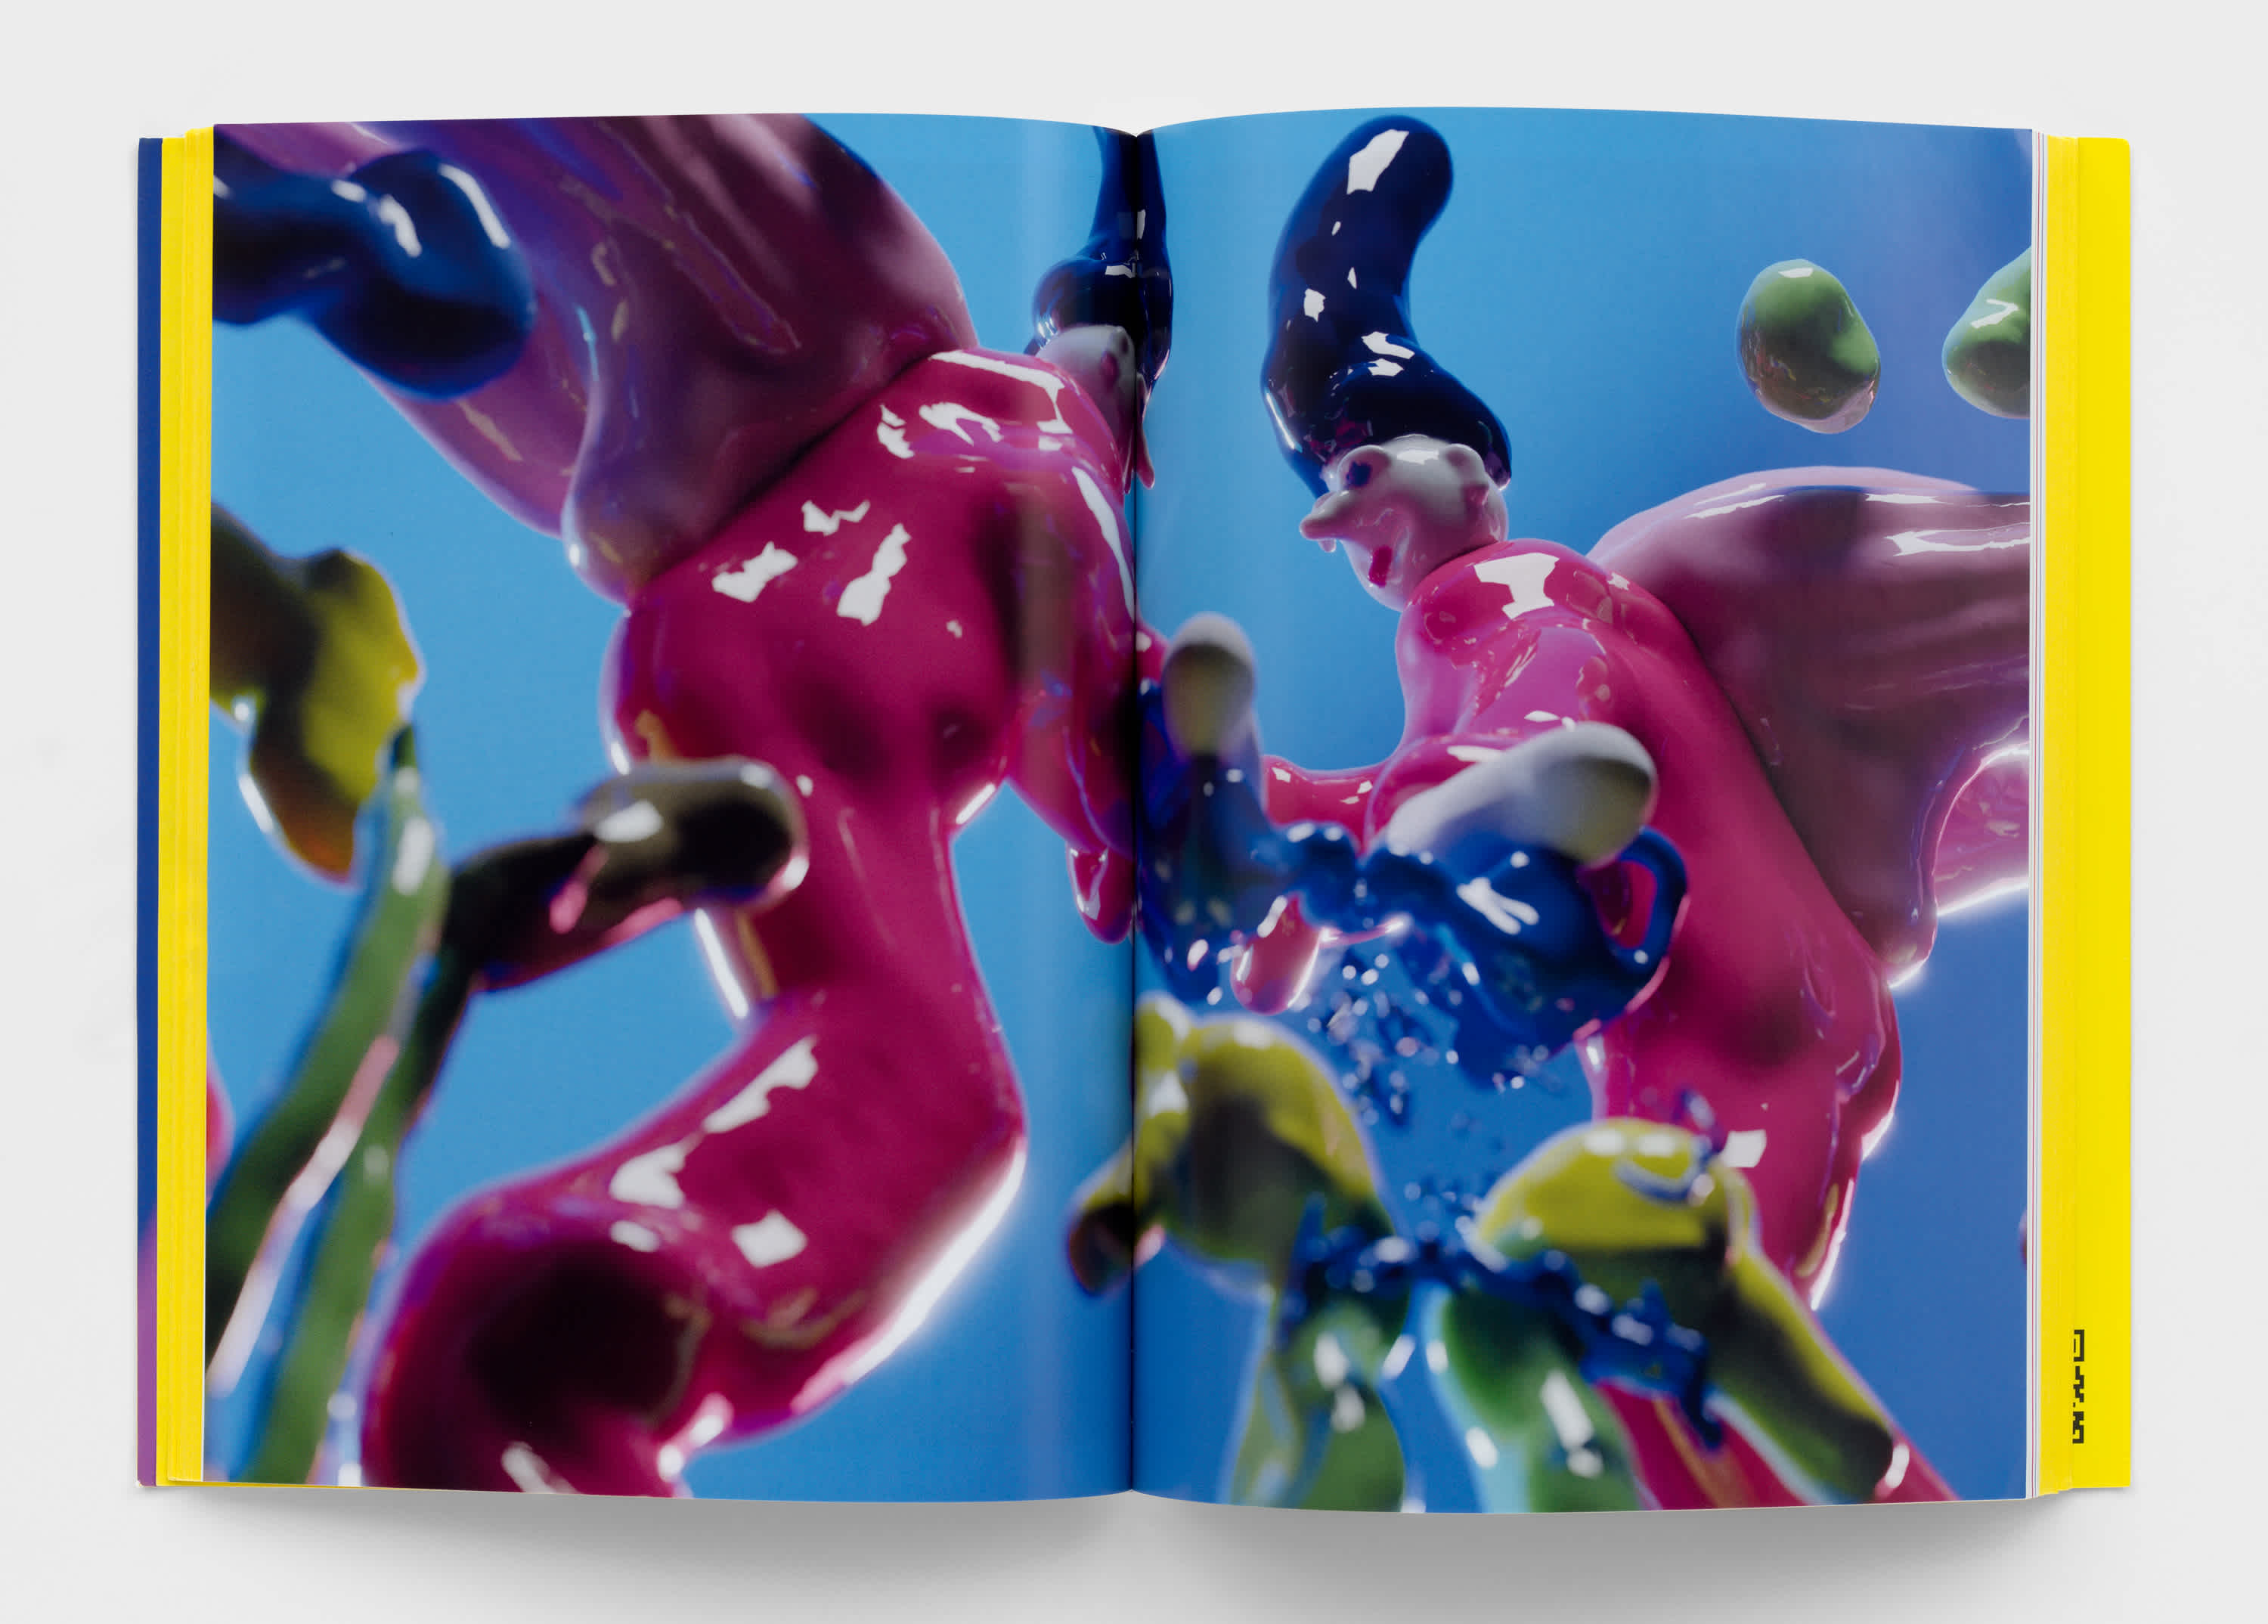 Open book with full bleed, centerfold image of the artist Austin Lee's sculptures.